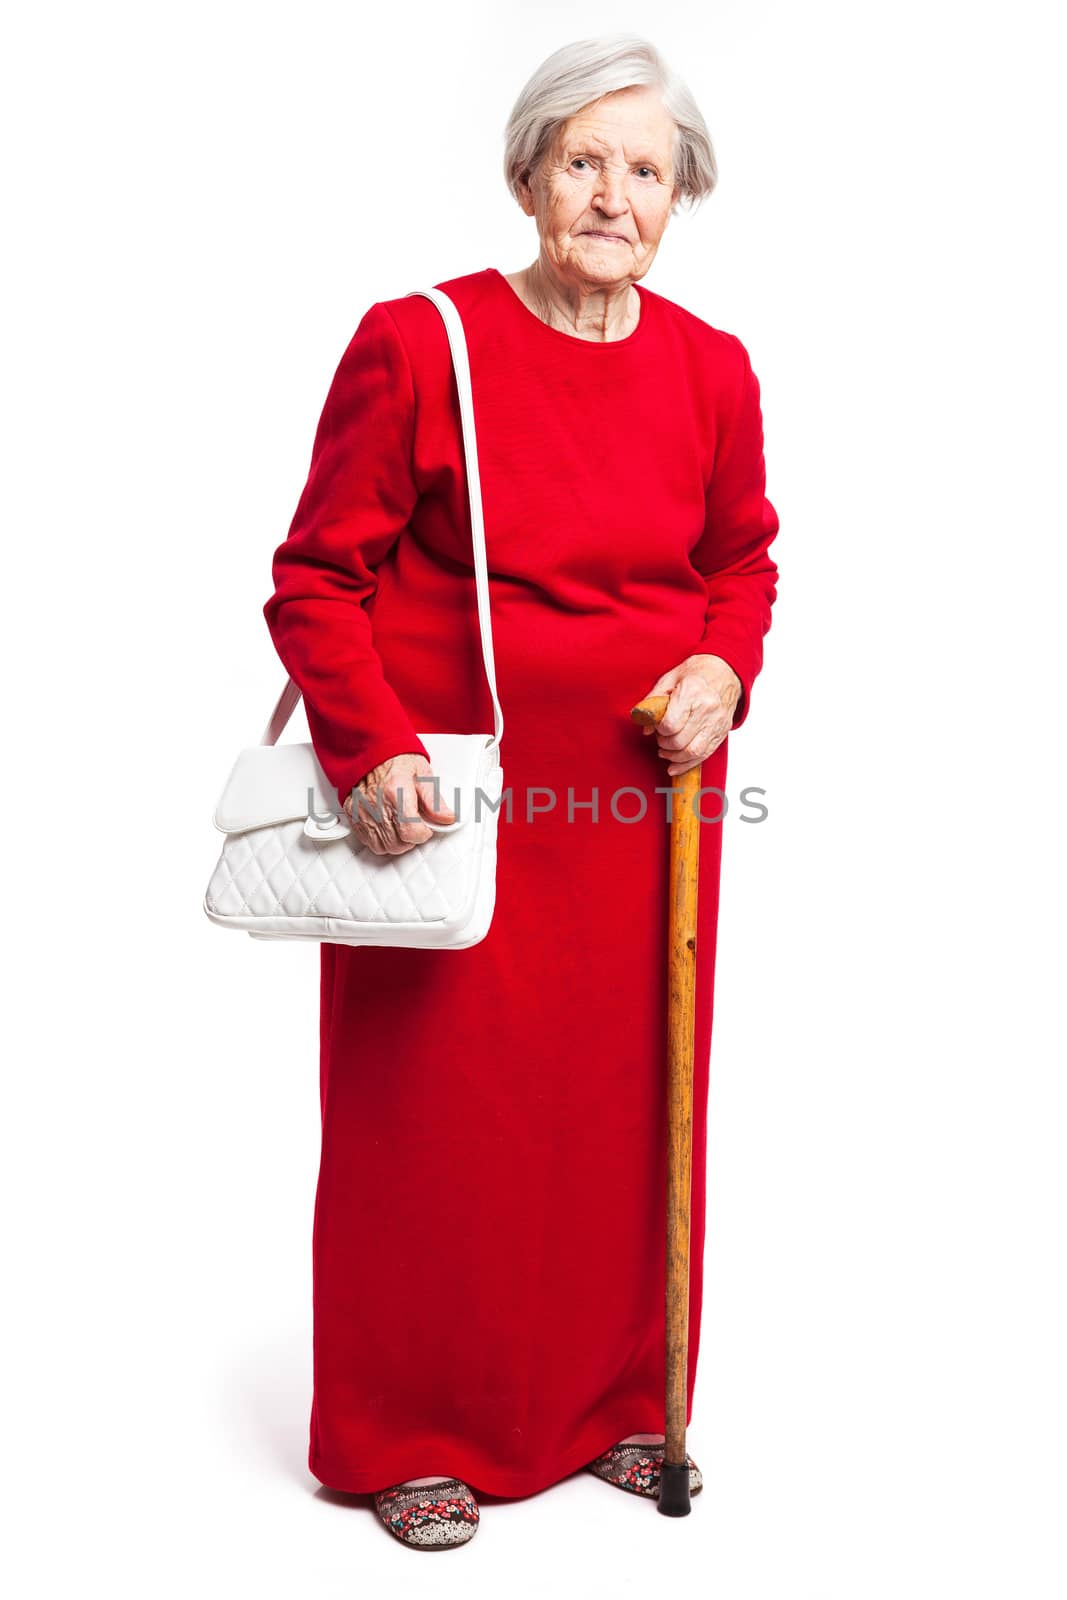 Senior woman with walking stick standing over white